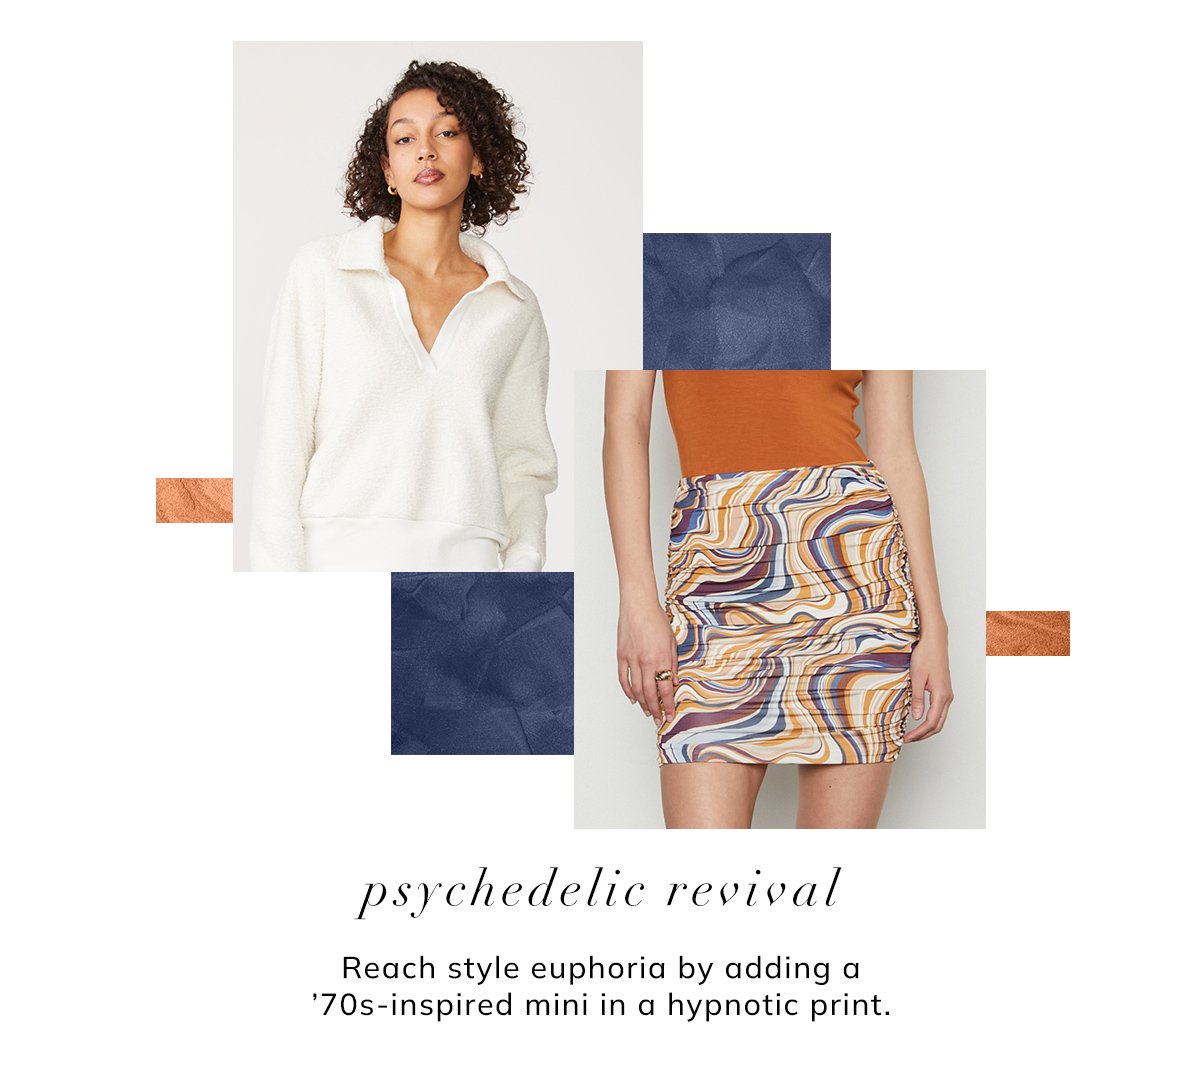 psychedelic revival. reach style euphoria by adding a '70s-inspired mini in a hypnotic print.